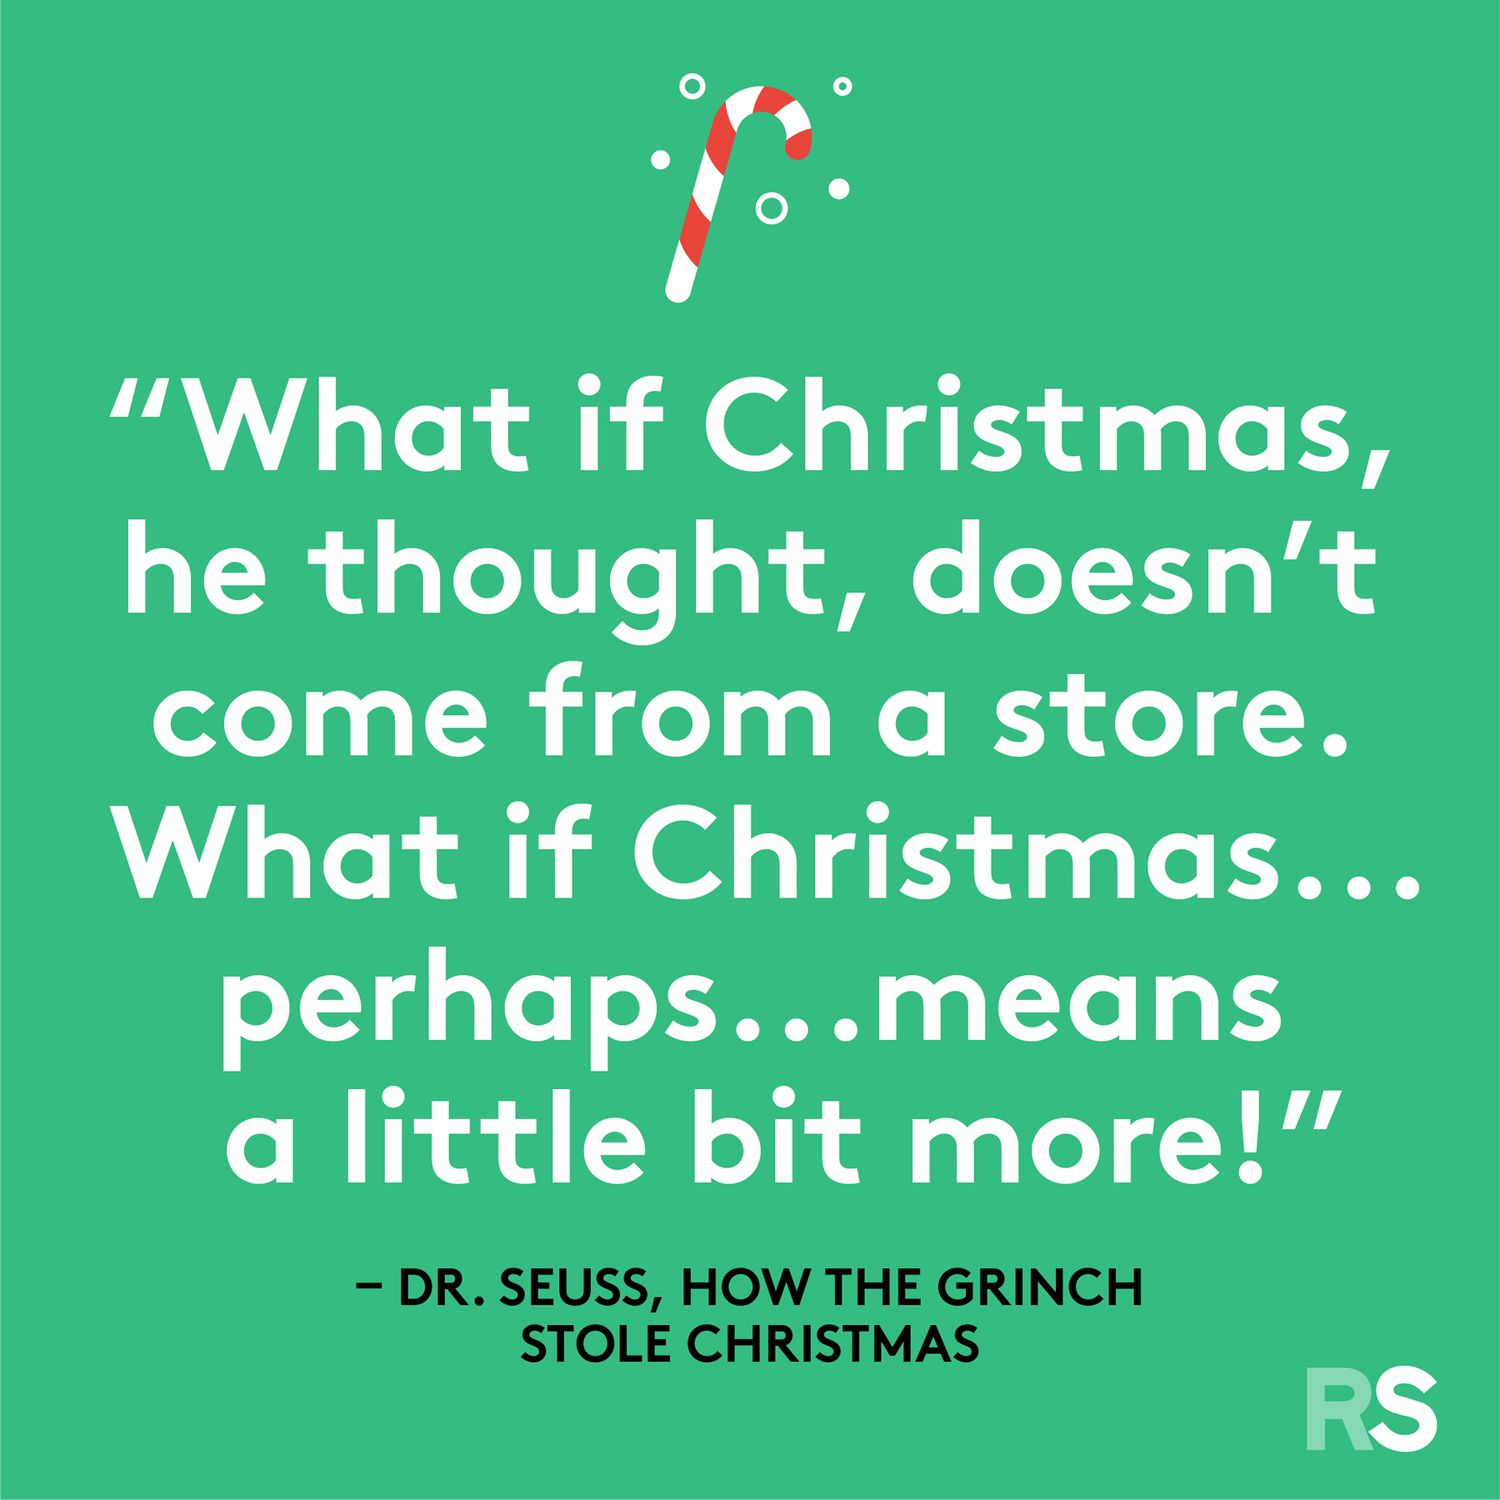 Best Christmas quotes - Dr. Seuss, How the Grinch Stole Christmas